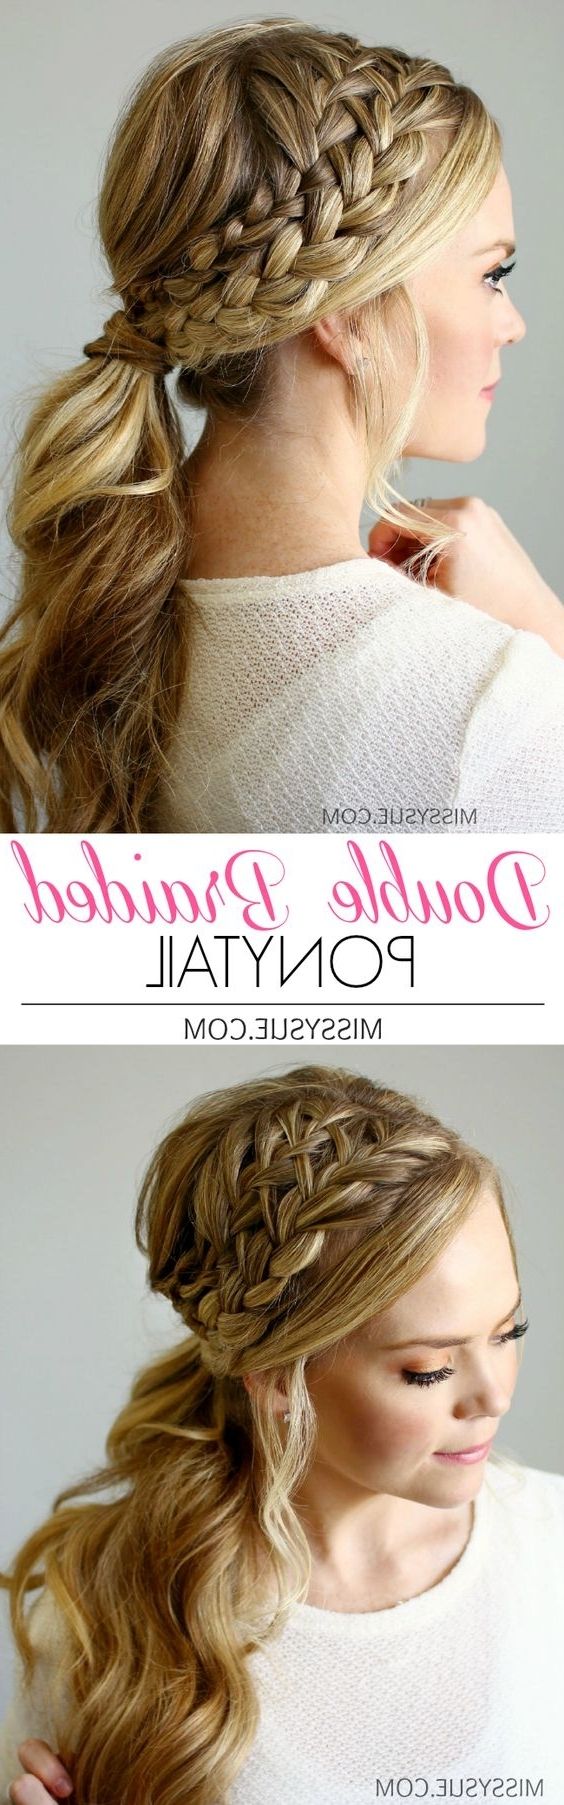 Current Ponytail Hairstyles With A Braided Element Throughout 30 Simple Easy Ponytail Hairstyles For Lazy Girls – Ponytail Ideas  (View 5 of 20)